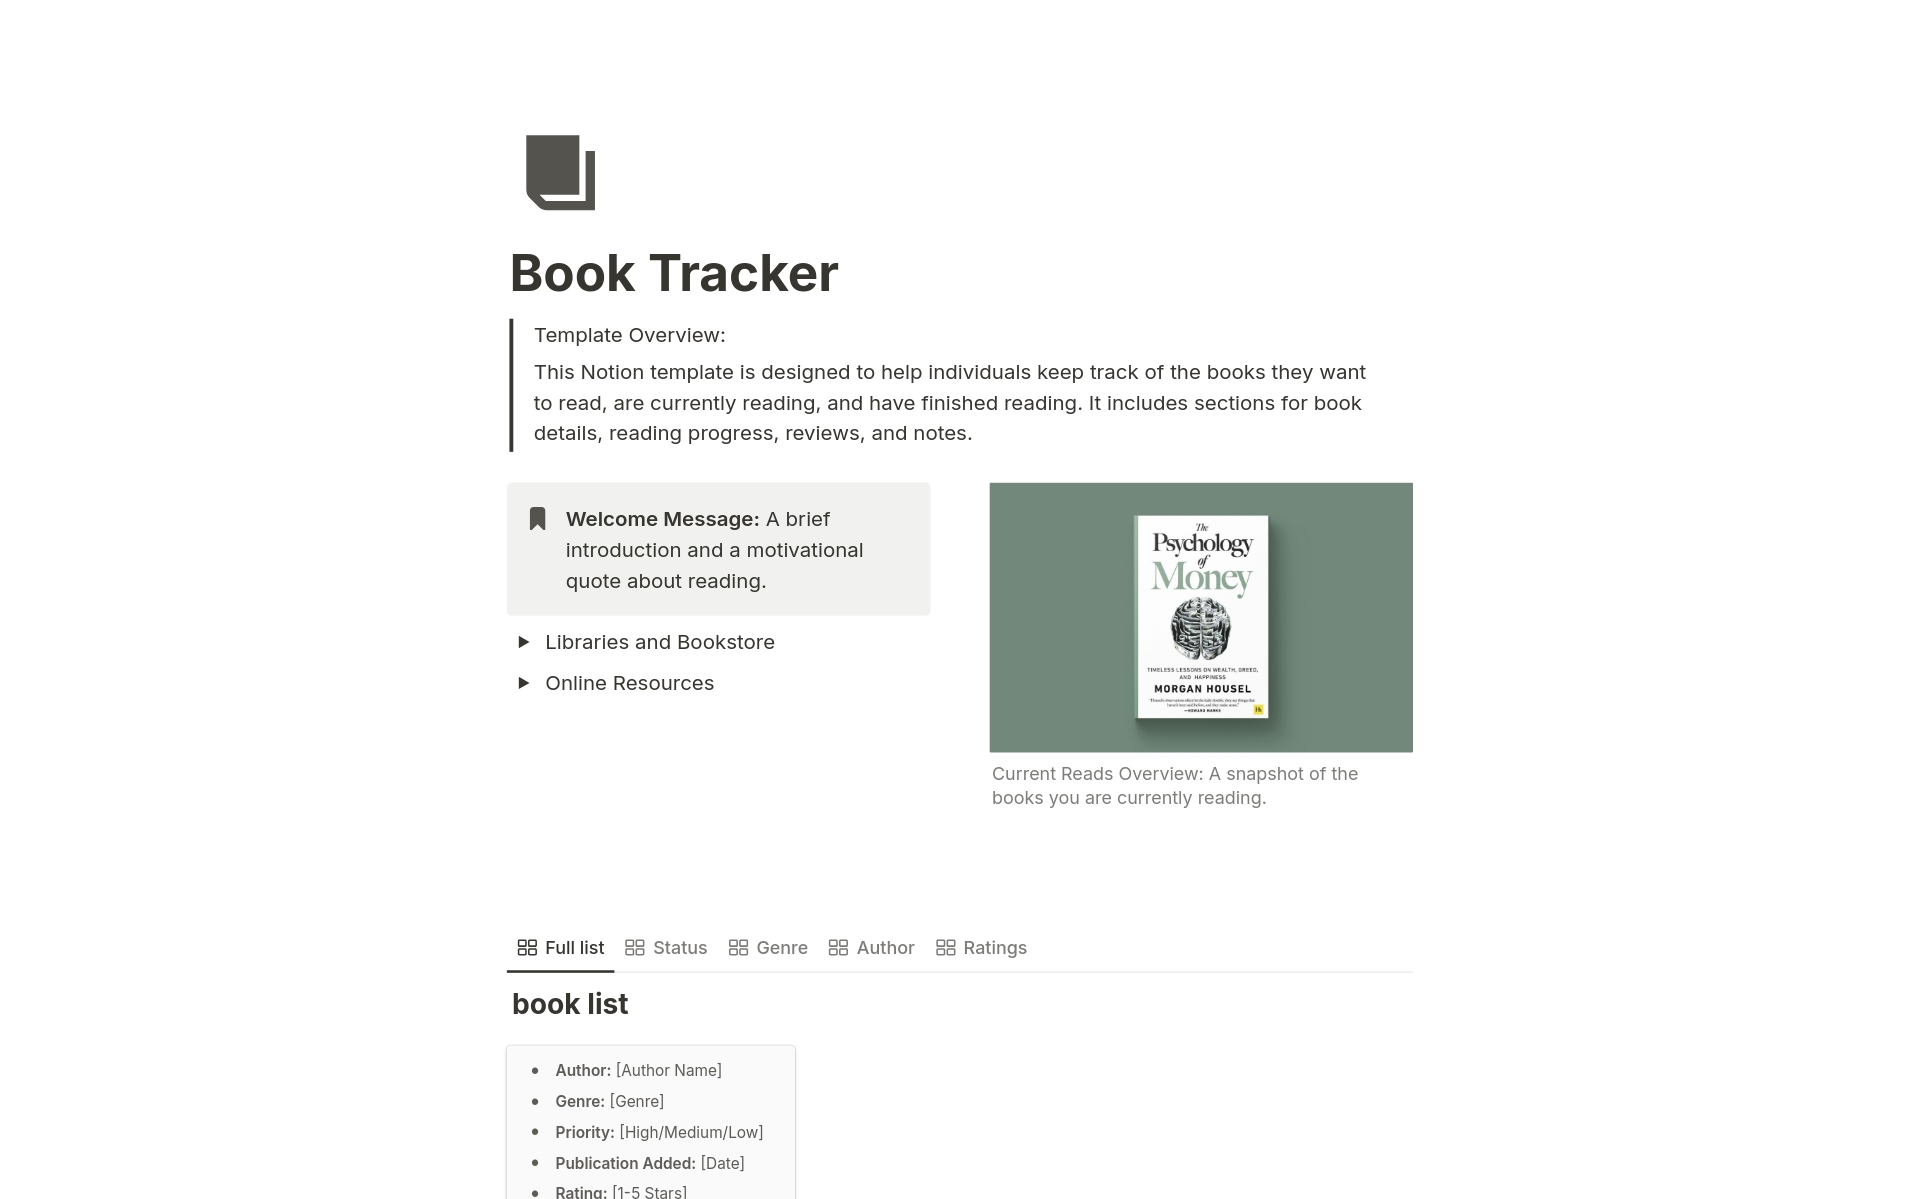 Dive into your next book with our Book Tracker Template. Track your reading progress and discover new favorites. Ready to take your reading to the next level? 